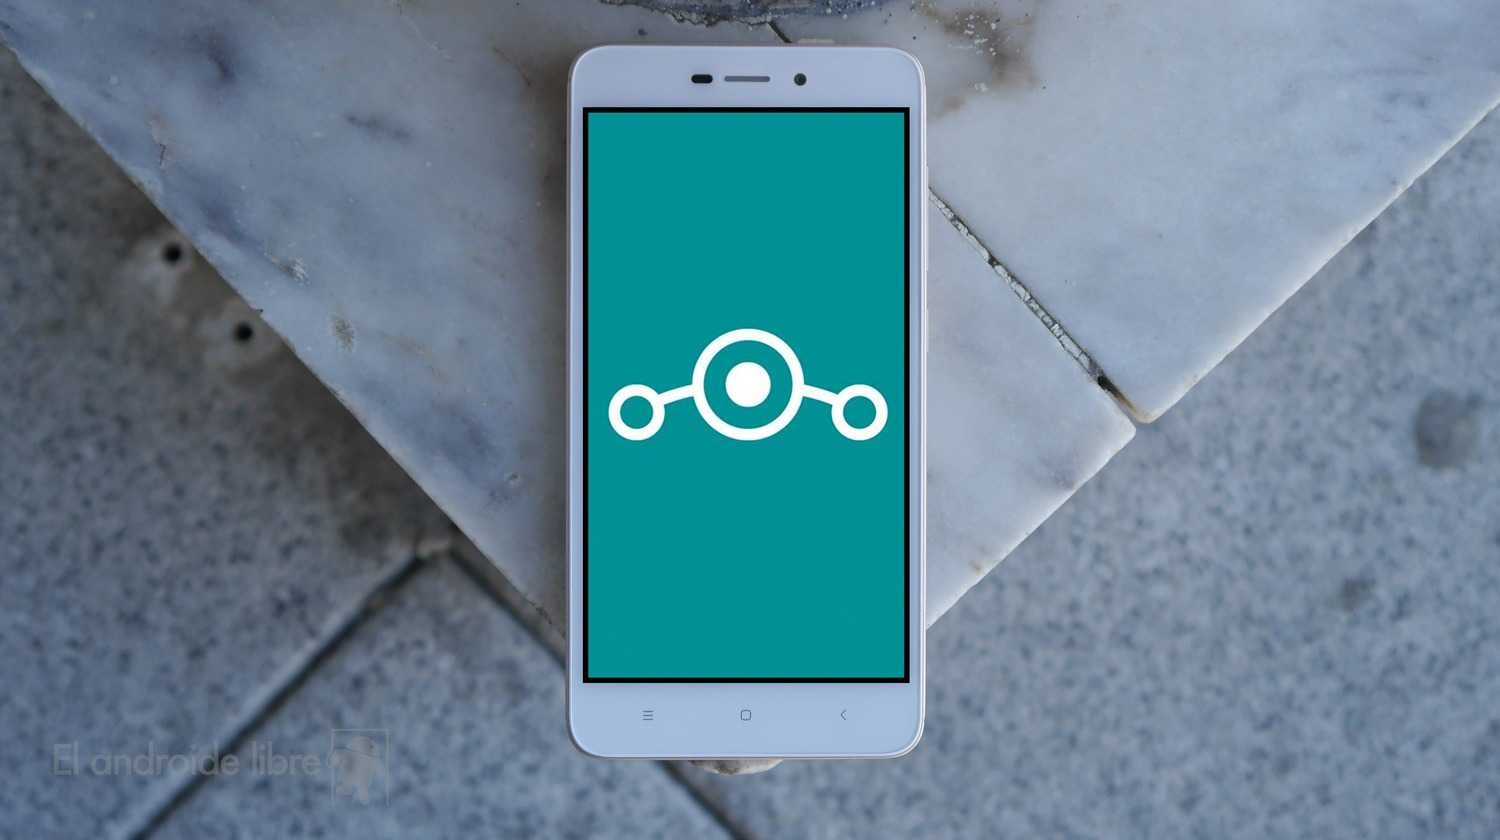 lineage os EAL